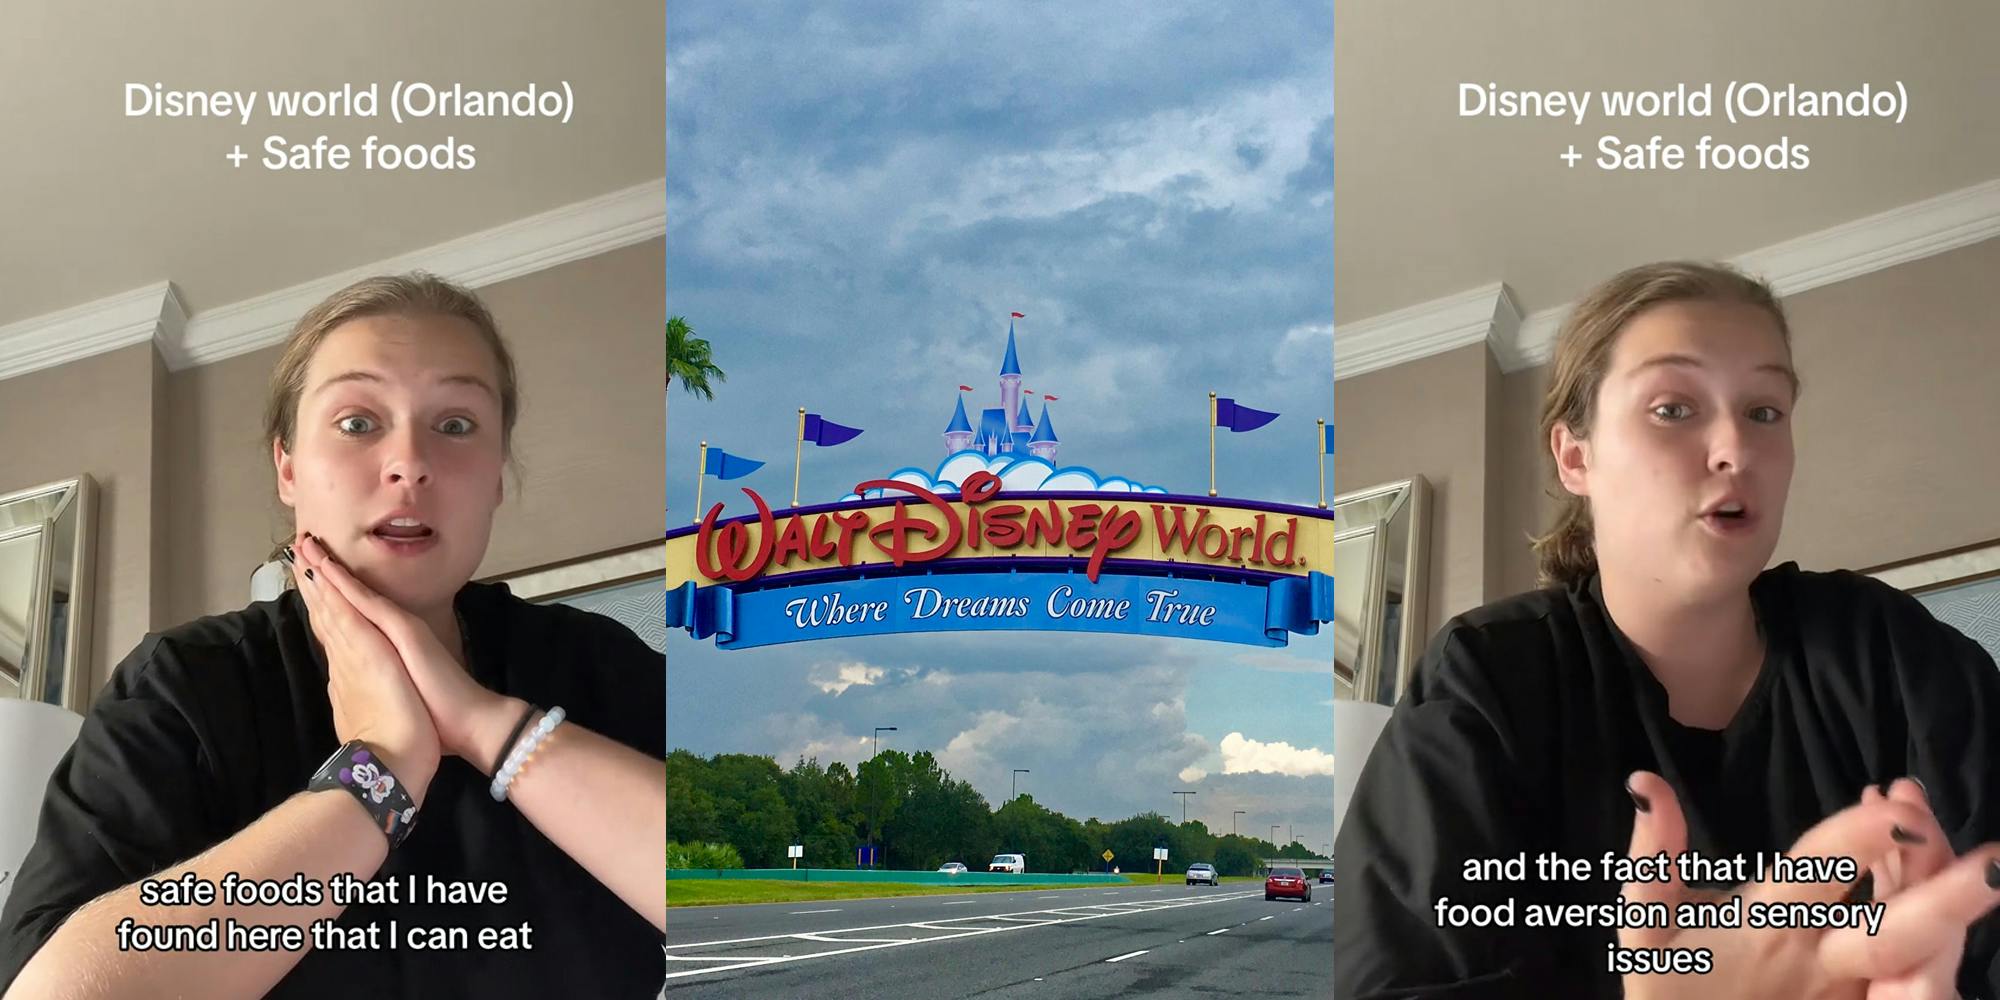 Disney World guest speaking with caption "Disney world (Orlando) + Safe foods safe foods that I have found here that I can eat" (l) Disney World sign above road (c) Disney World guest speaking with caption "Disney world (Orlando) + Safe foods and the fact that I have food aversion and sensory issues" (r)